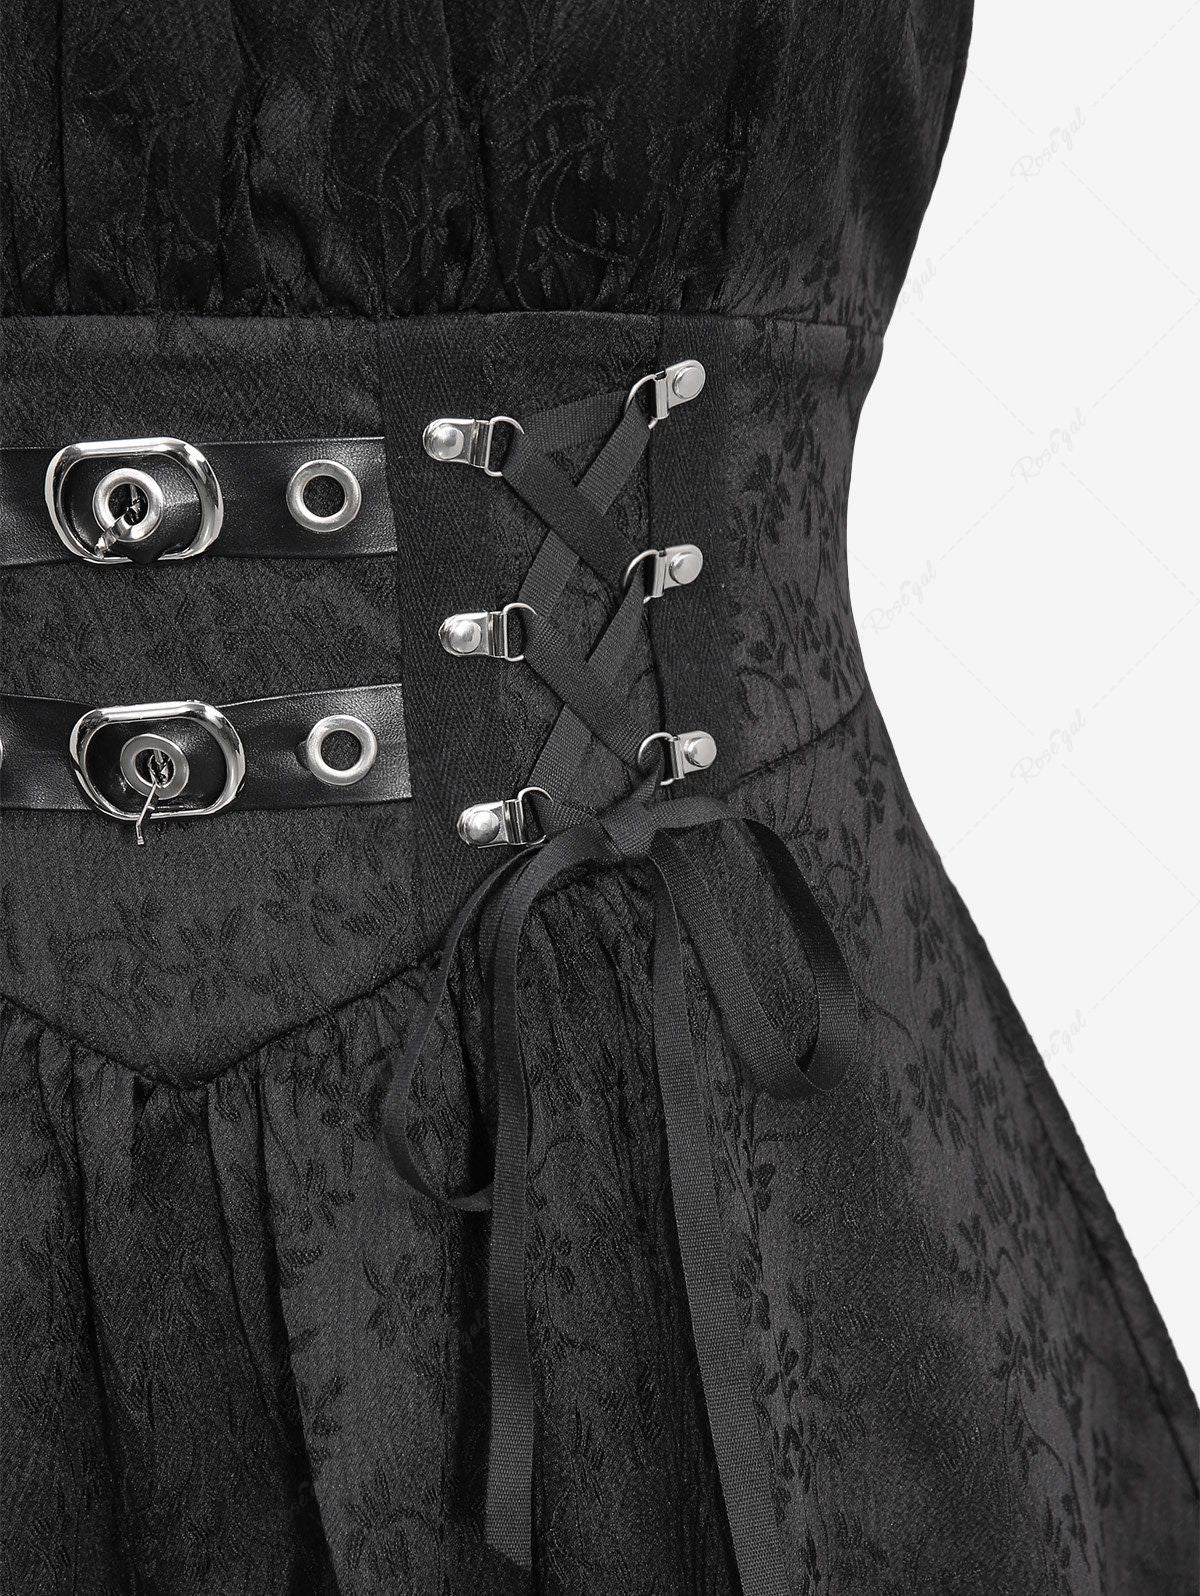 Gothic Floral Jacquard Embroidered Bowknot Tied PU Straps Grommet Buckle Ruched Lace Up Solid A Line Handkerchief Dress